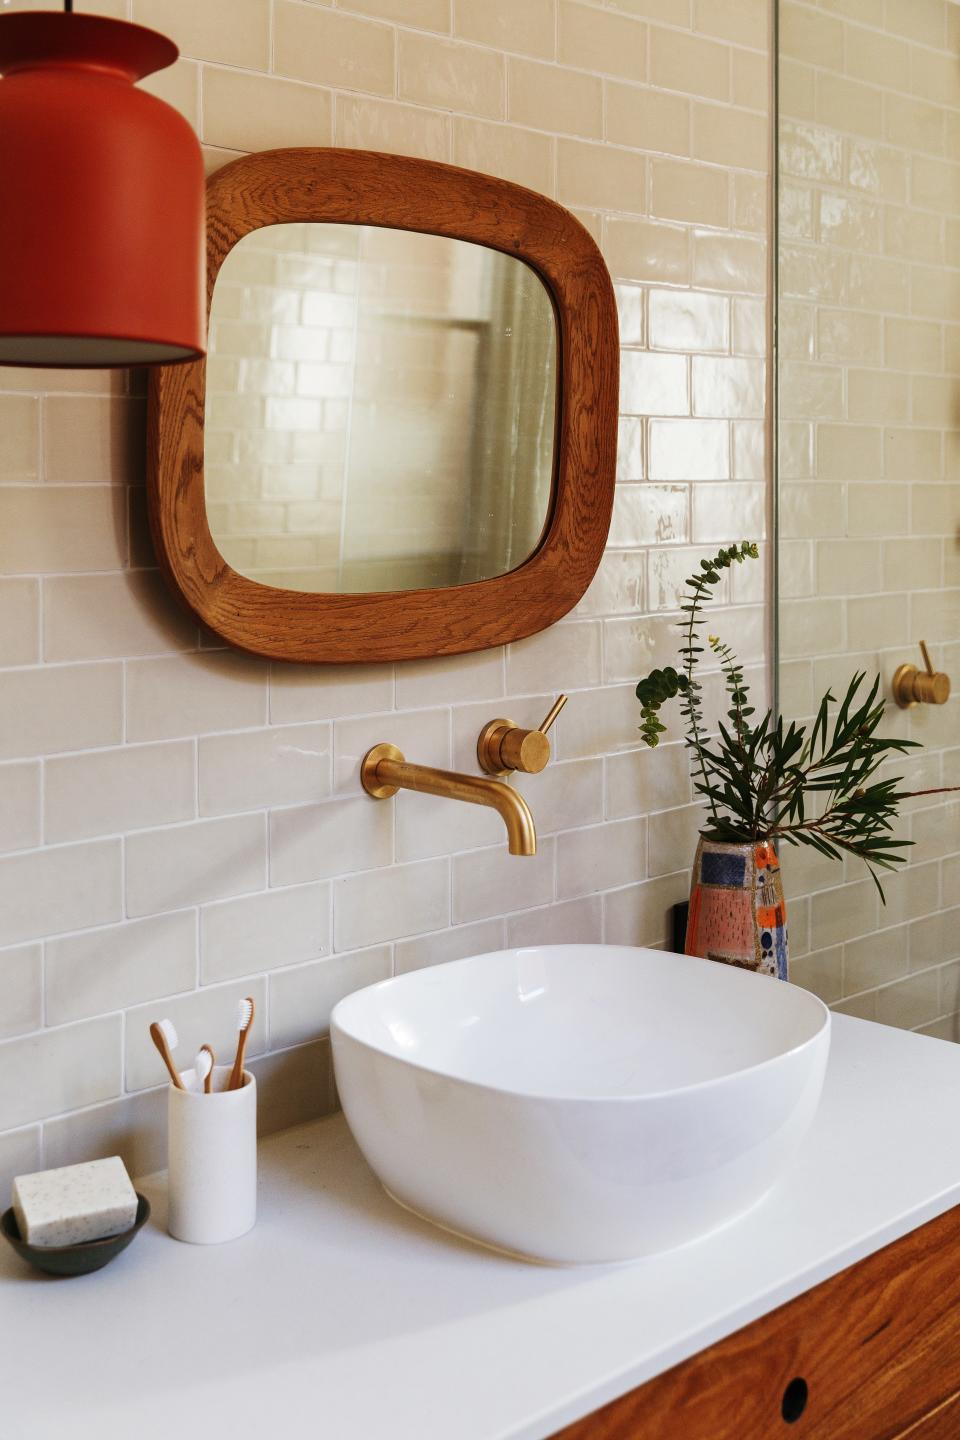 “Amy is a purveyor of textile design, and her bathroom is another extension of her love for pattern,” Kate says. “Of course a pop of red in the pendant punctuated the design and created another playful element.”